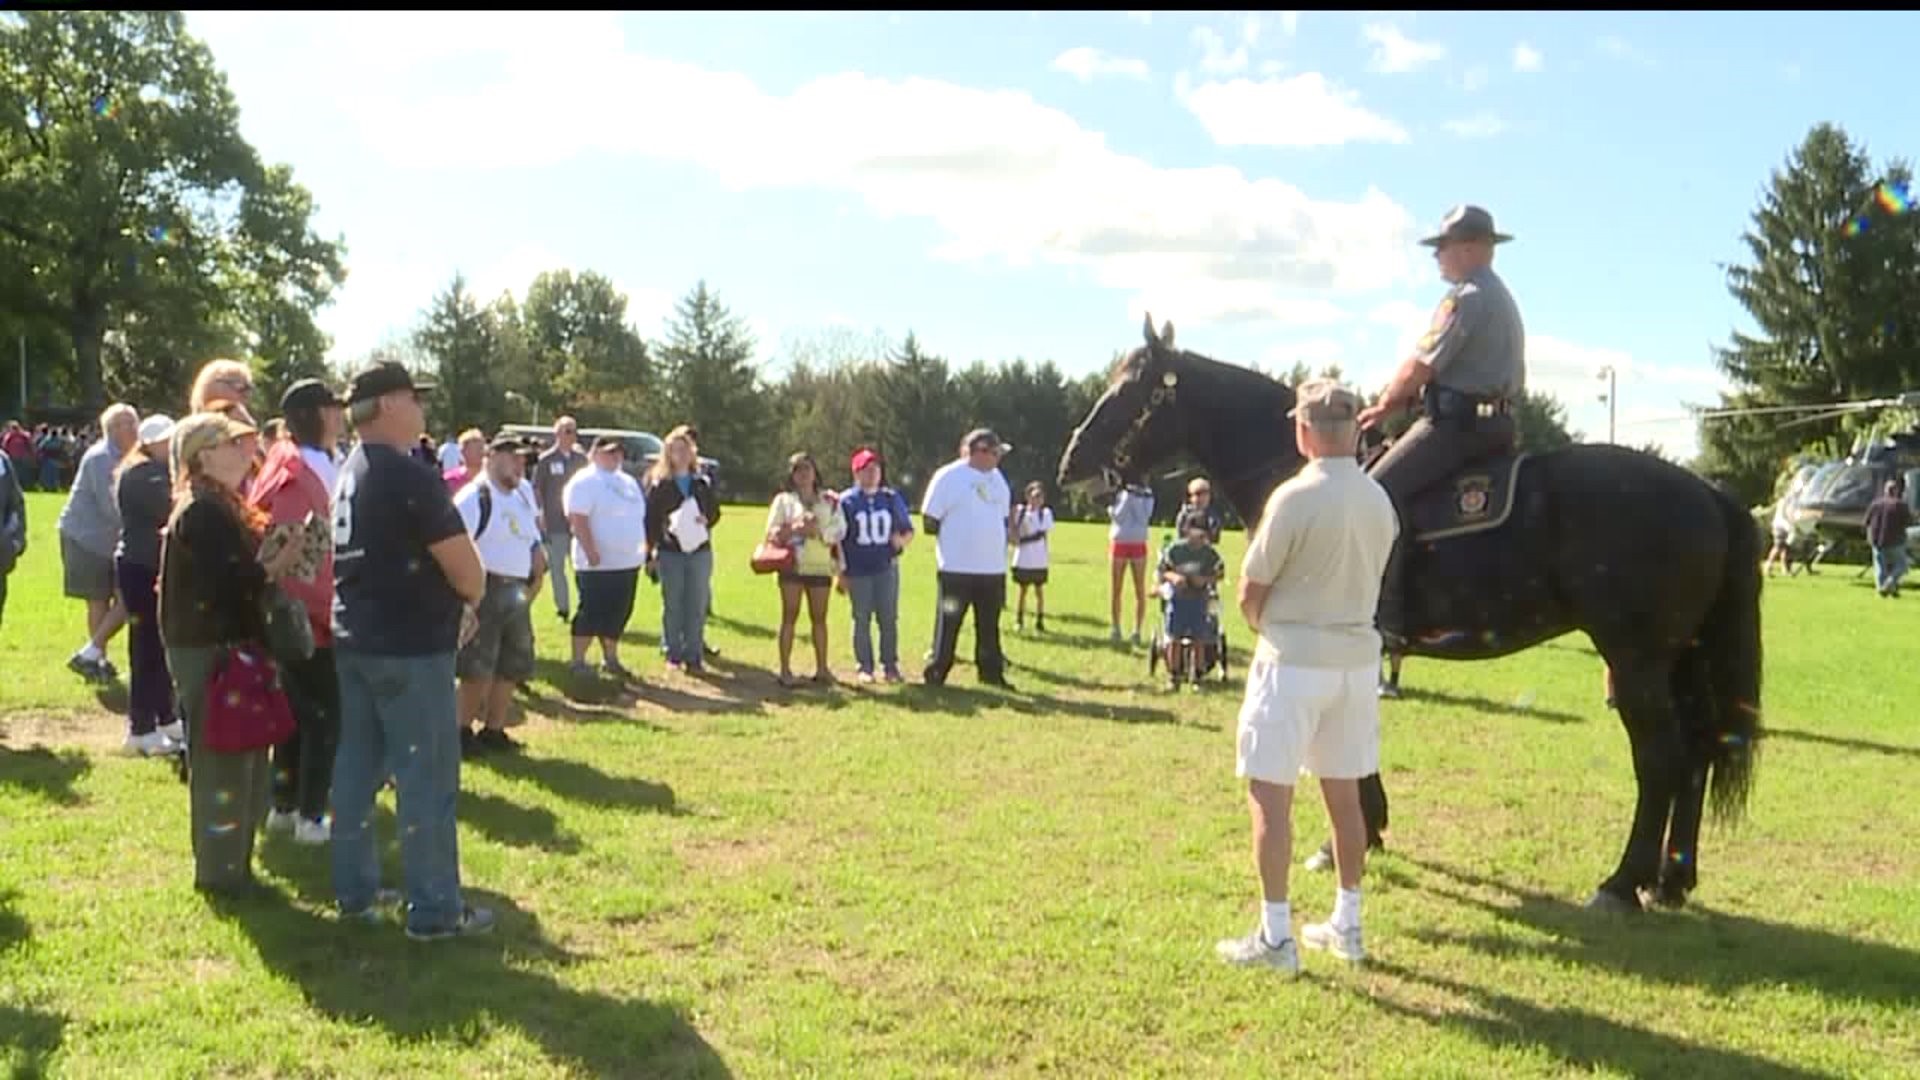 State police host `Sunny Day Camp` for people with special needs in Dauphin County